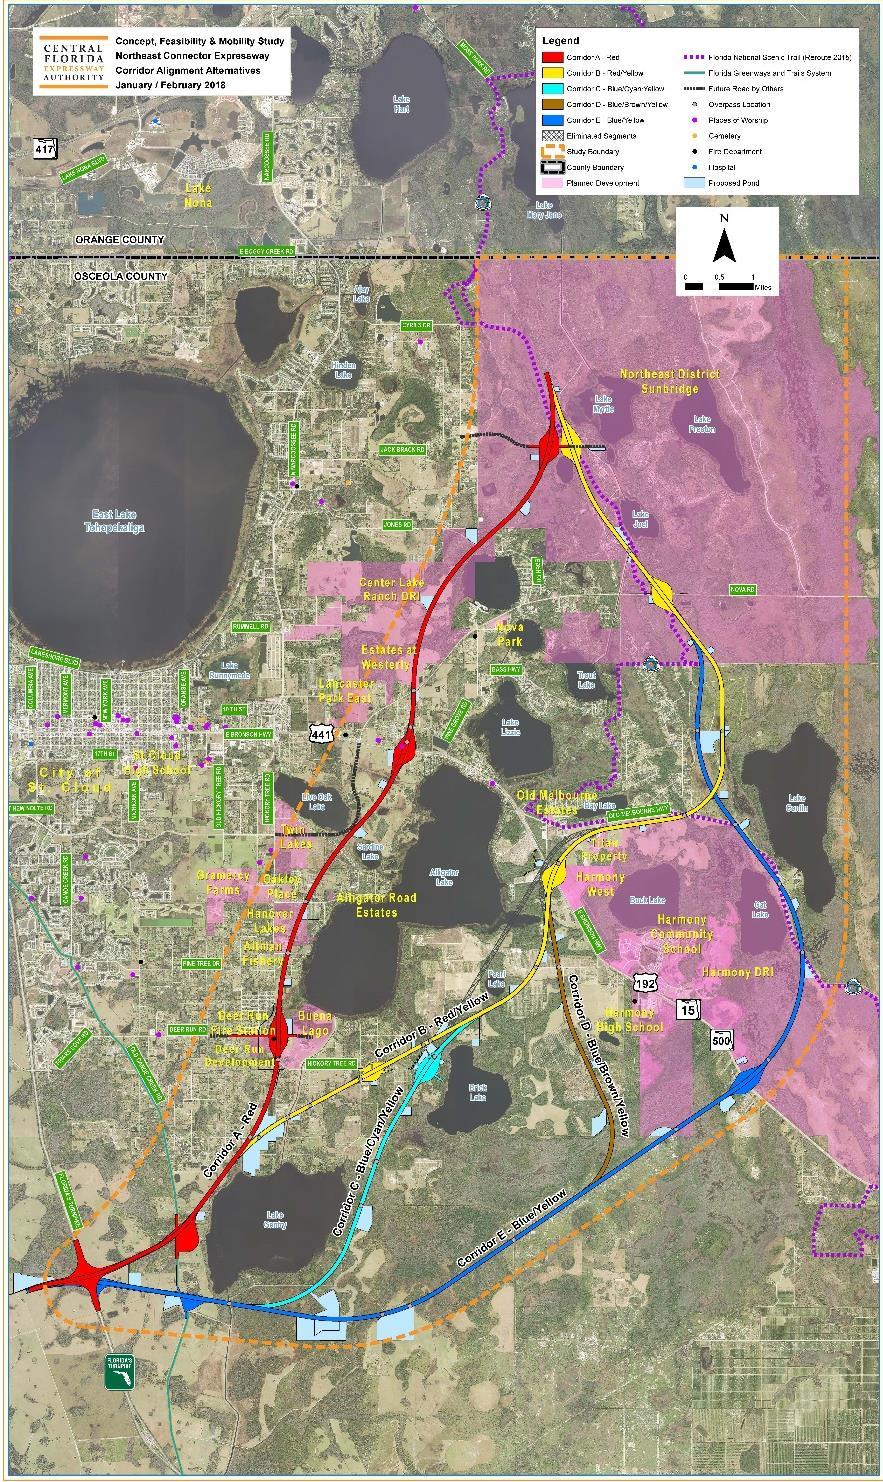 The blue/brown corridor was derived from meetings with stakeholders and was an alternative to alignments that had more impacts to land use development and residents.